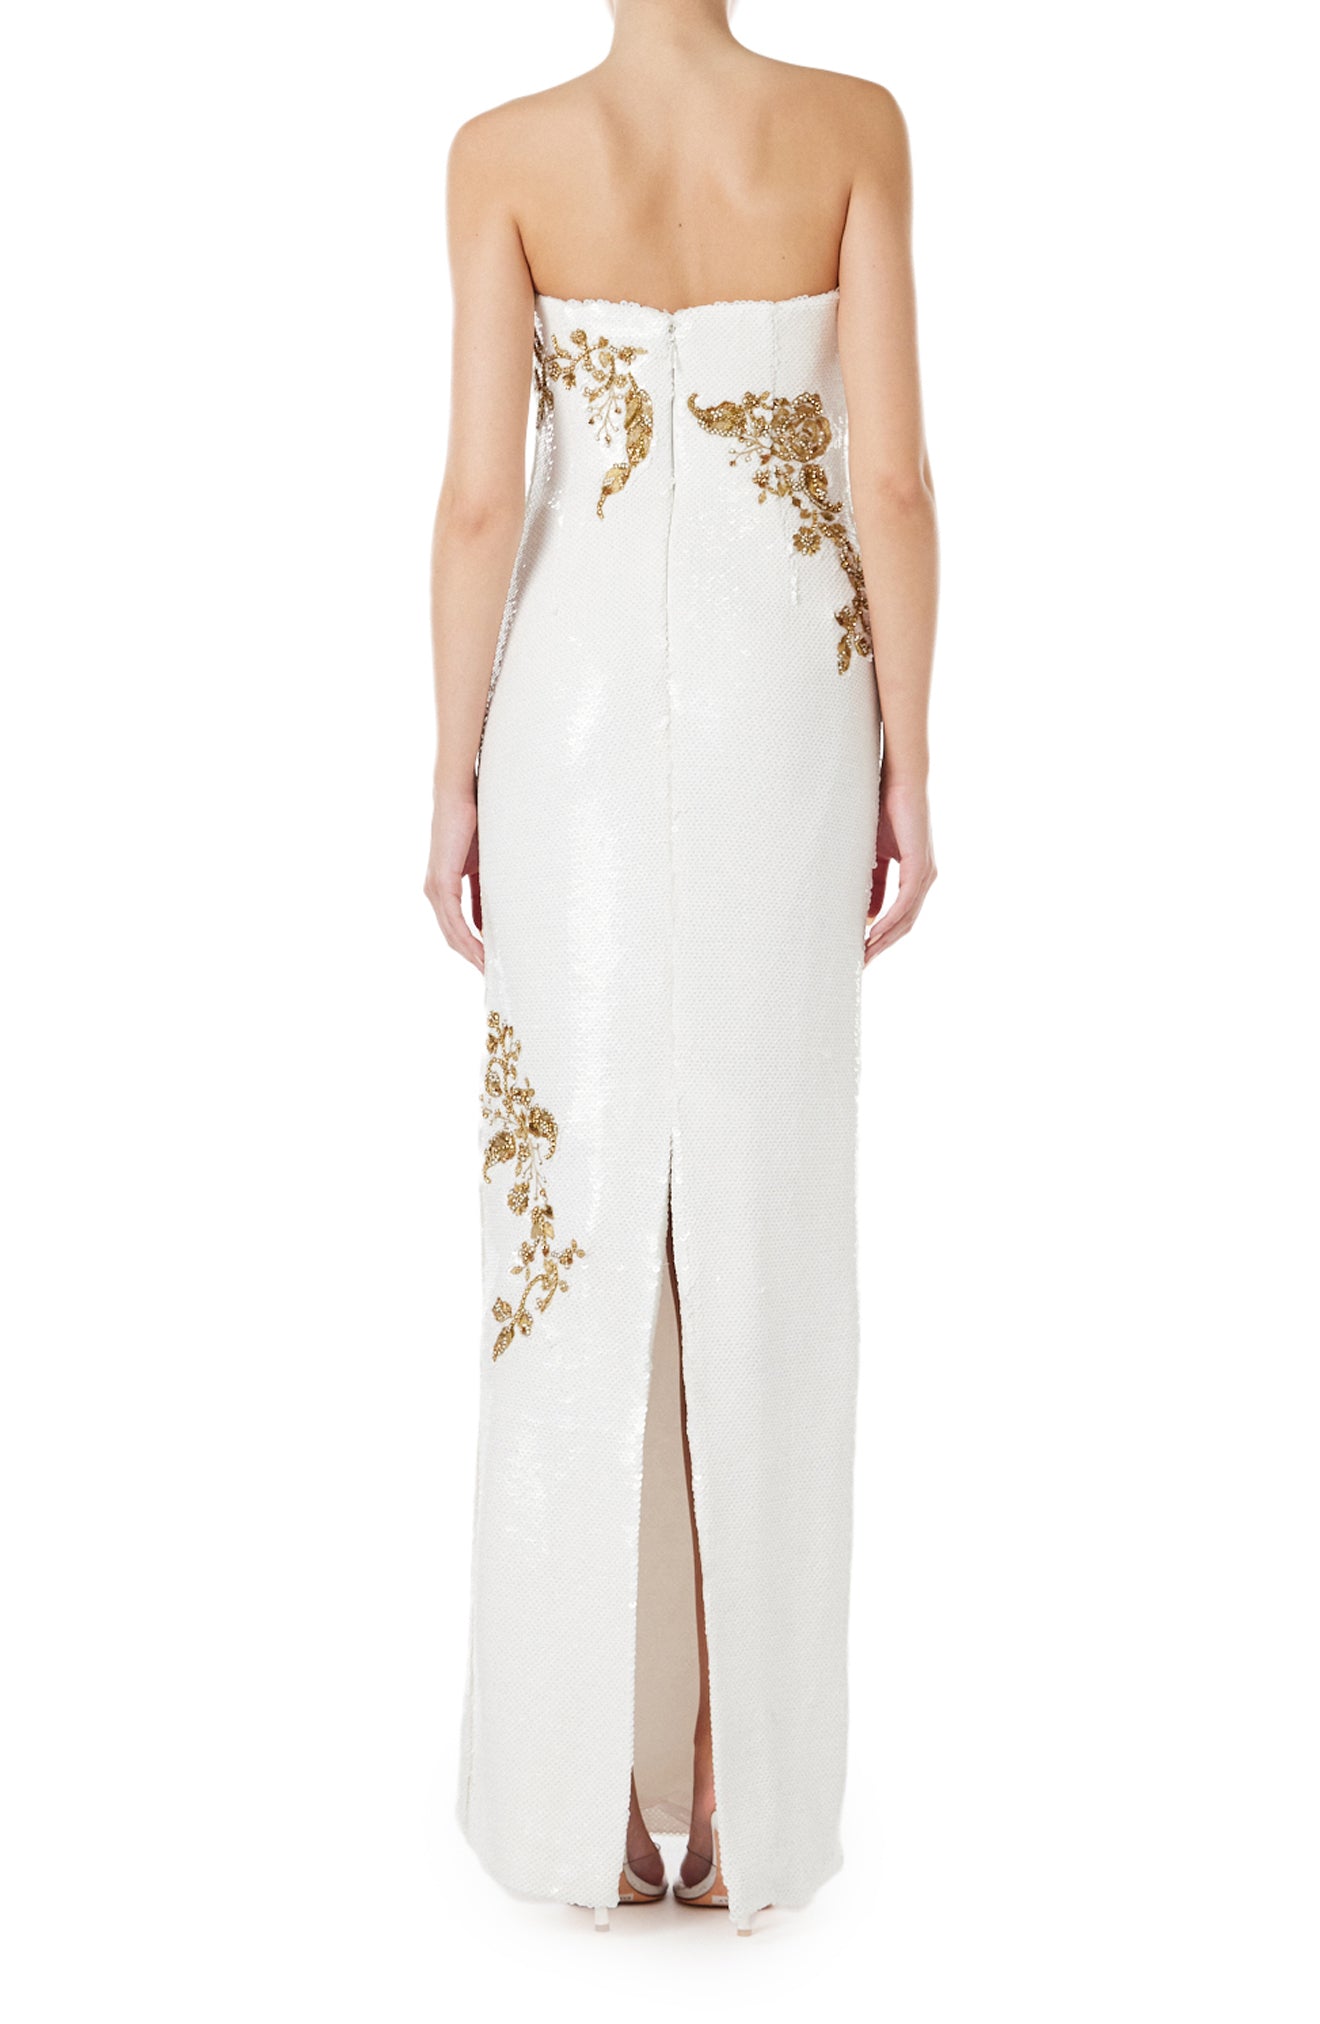 Monique Lhuillier strapless sequin column gown in silk white sequins and gold embroidery.